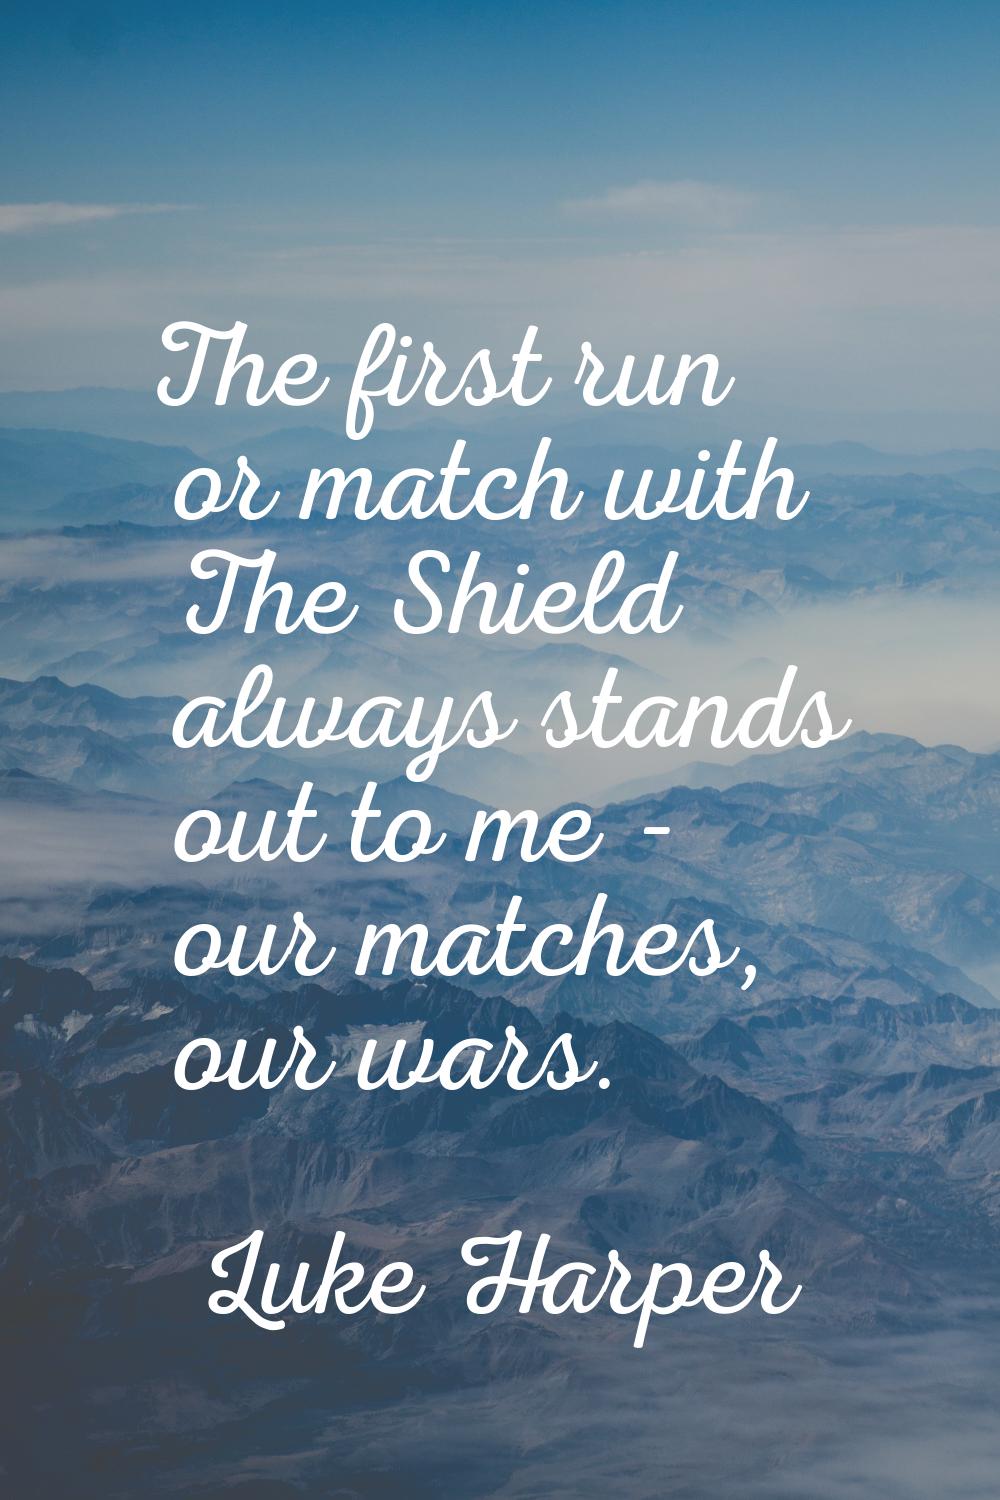 The first run or match with The Shield always stands out to me - our matches, our wars.